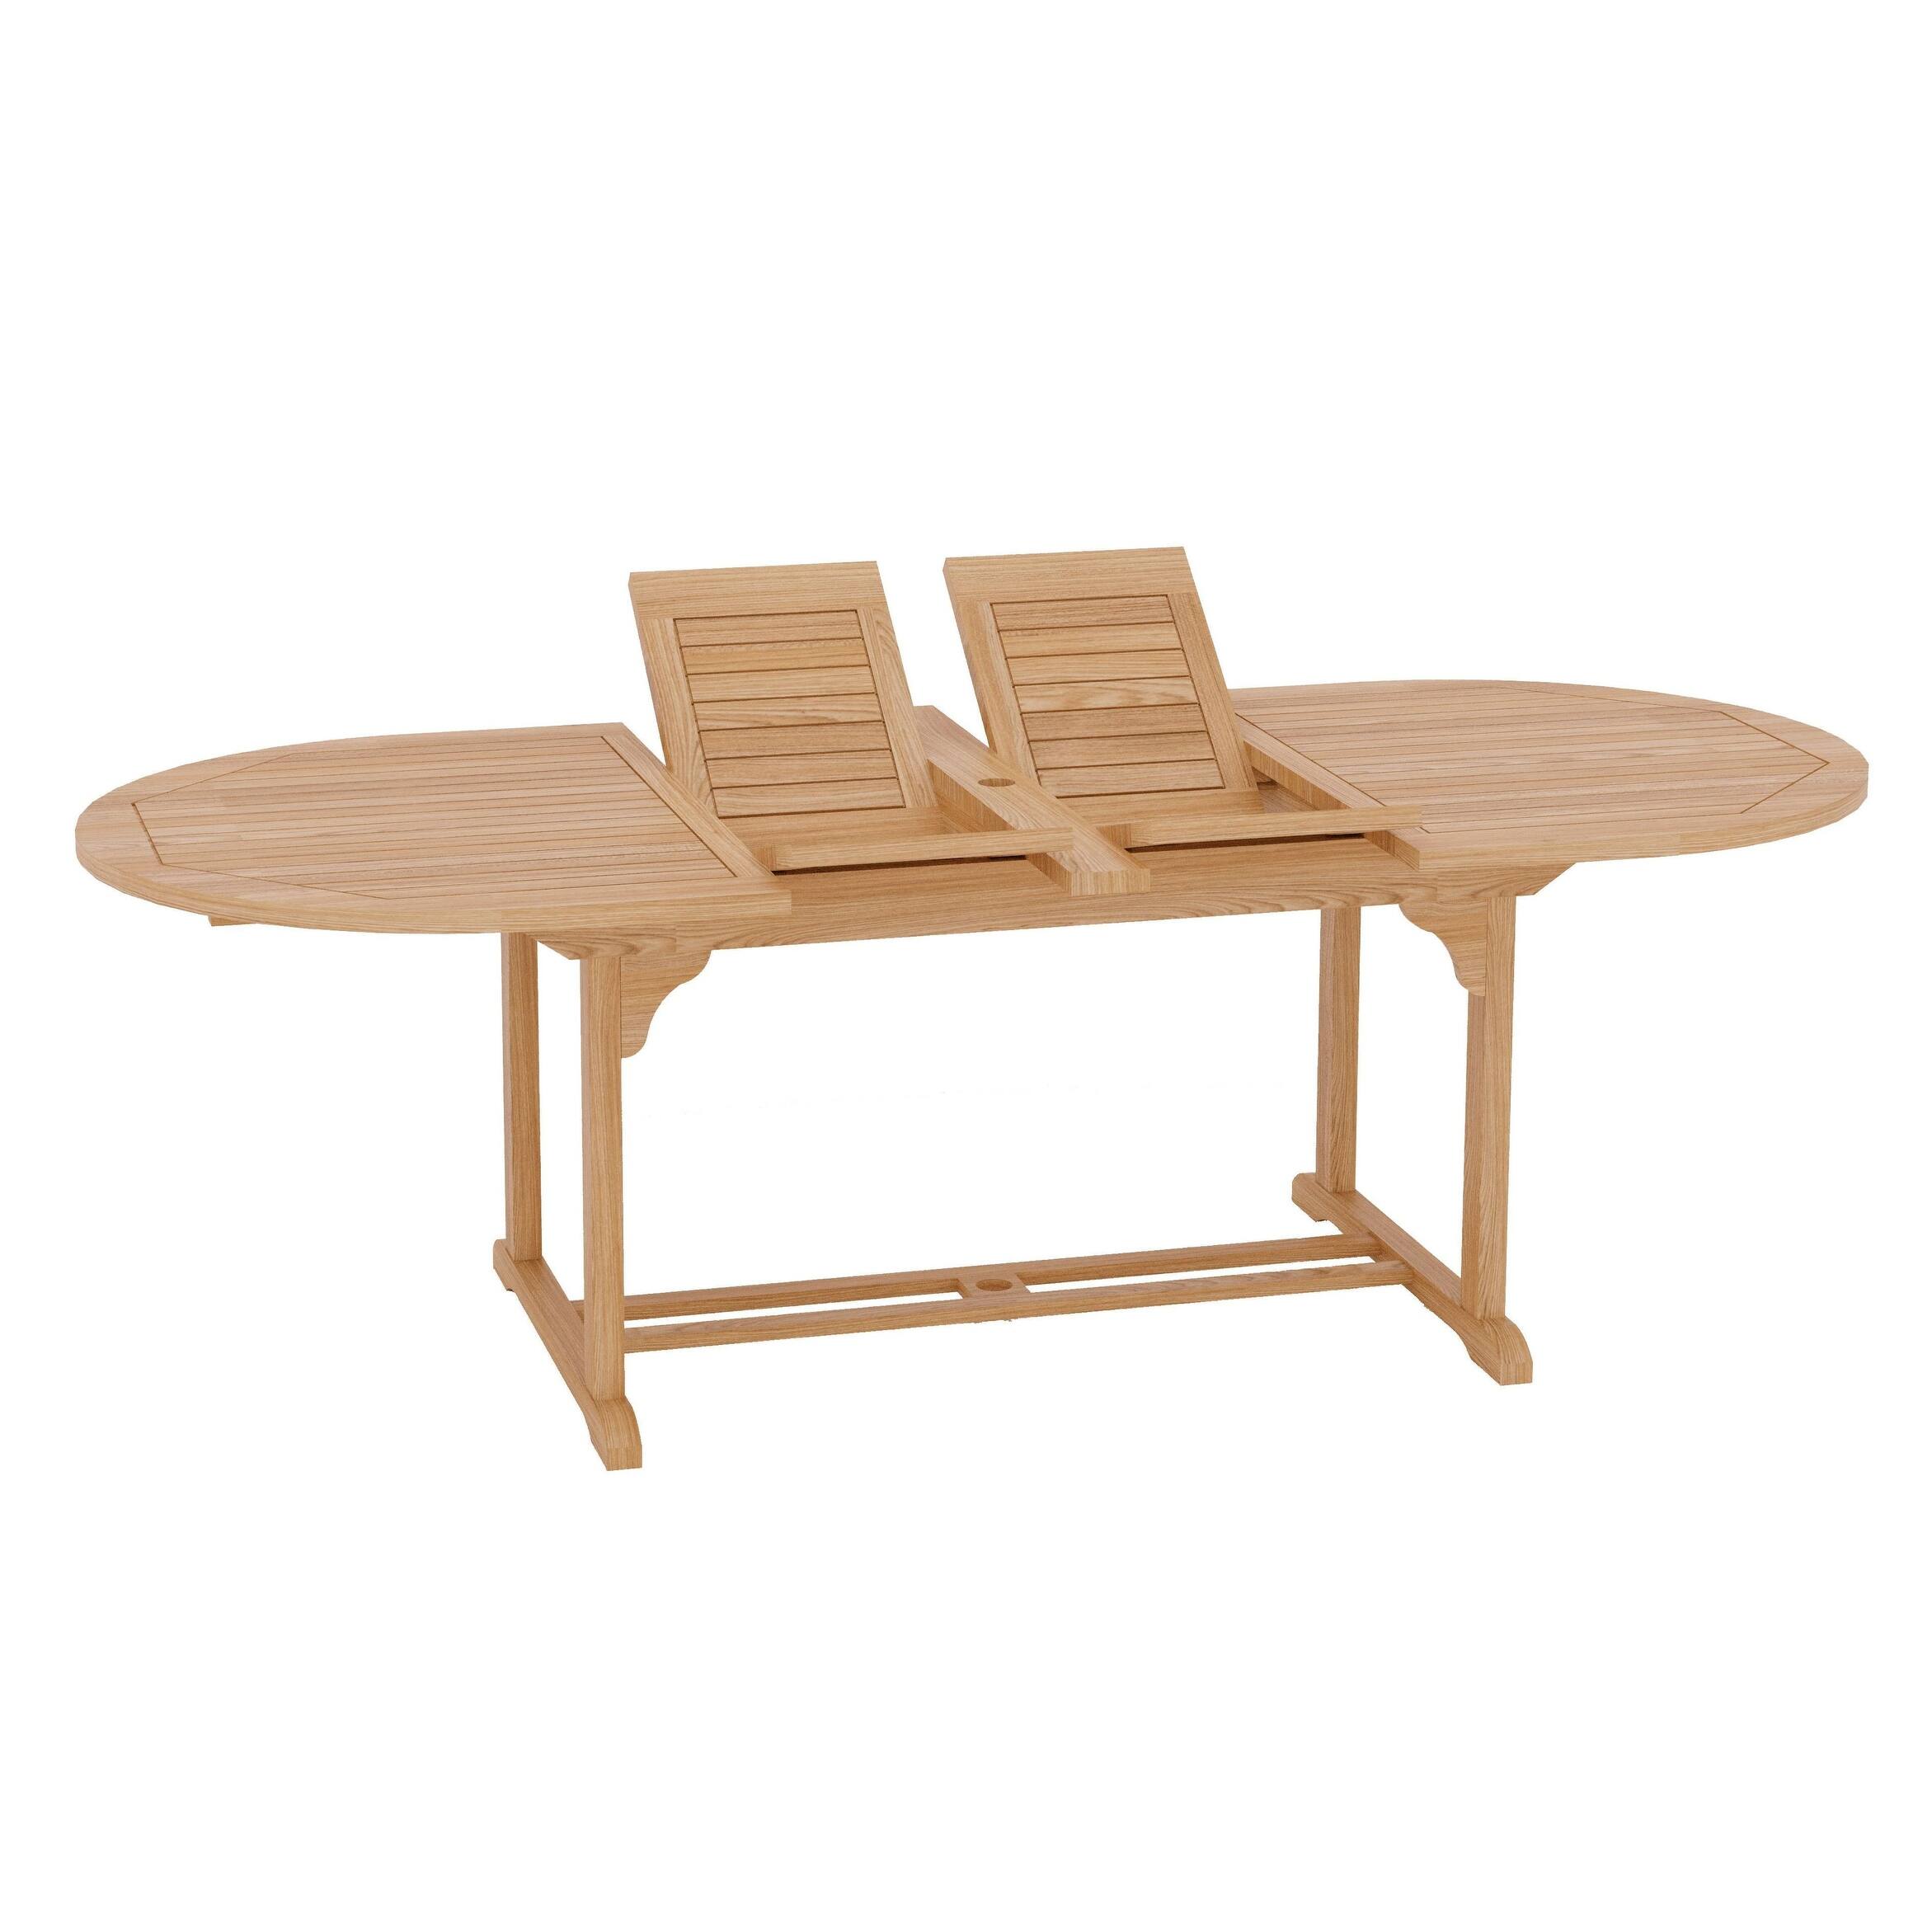 Amelie Oval Teak Outdoor Dining Table with Built-In Extension - 39.5 x 29.5 x 94.5